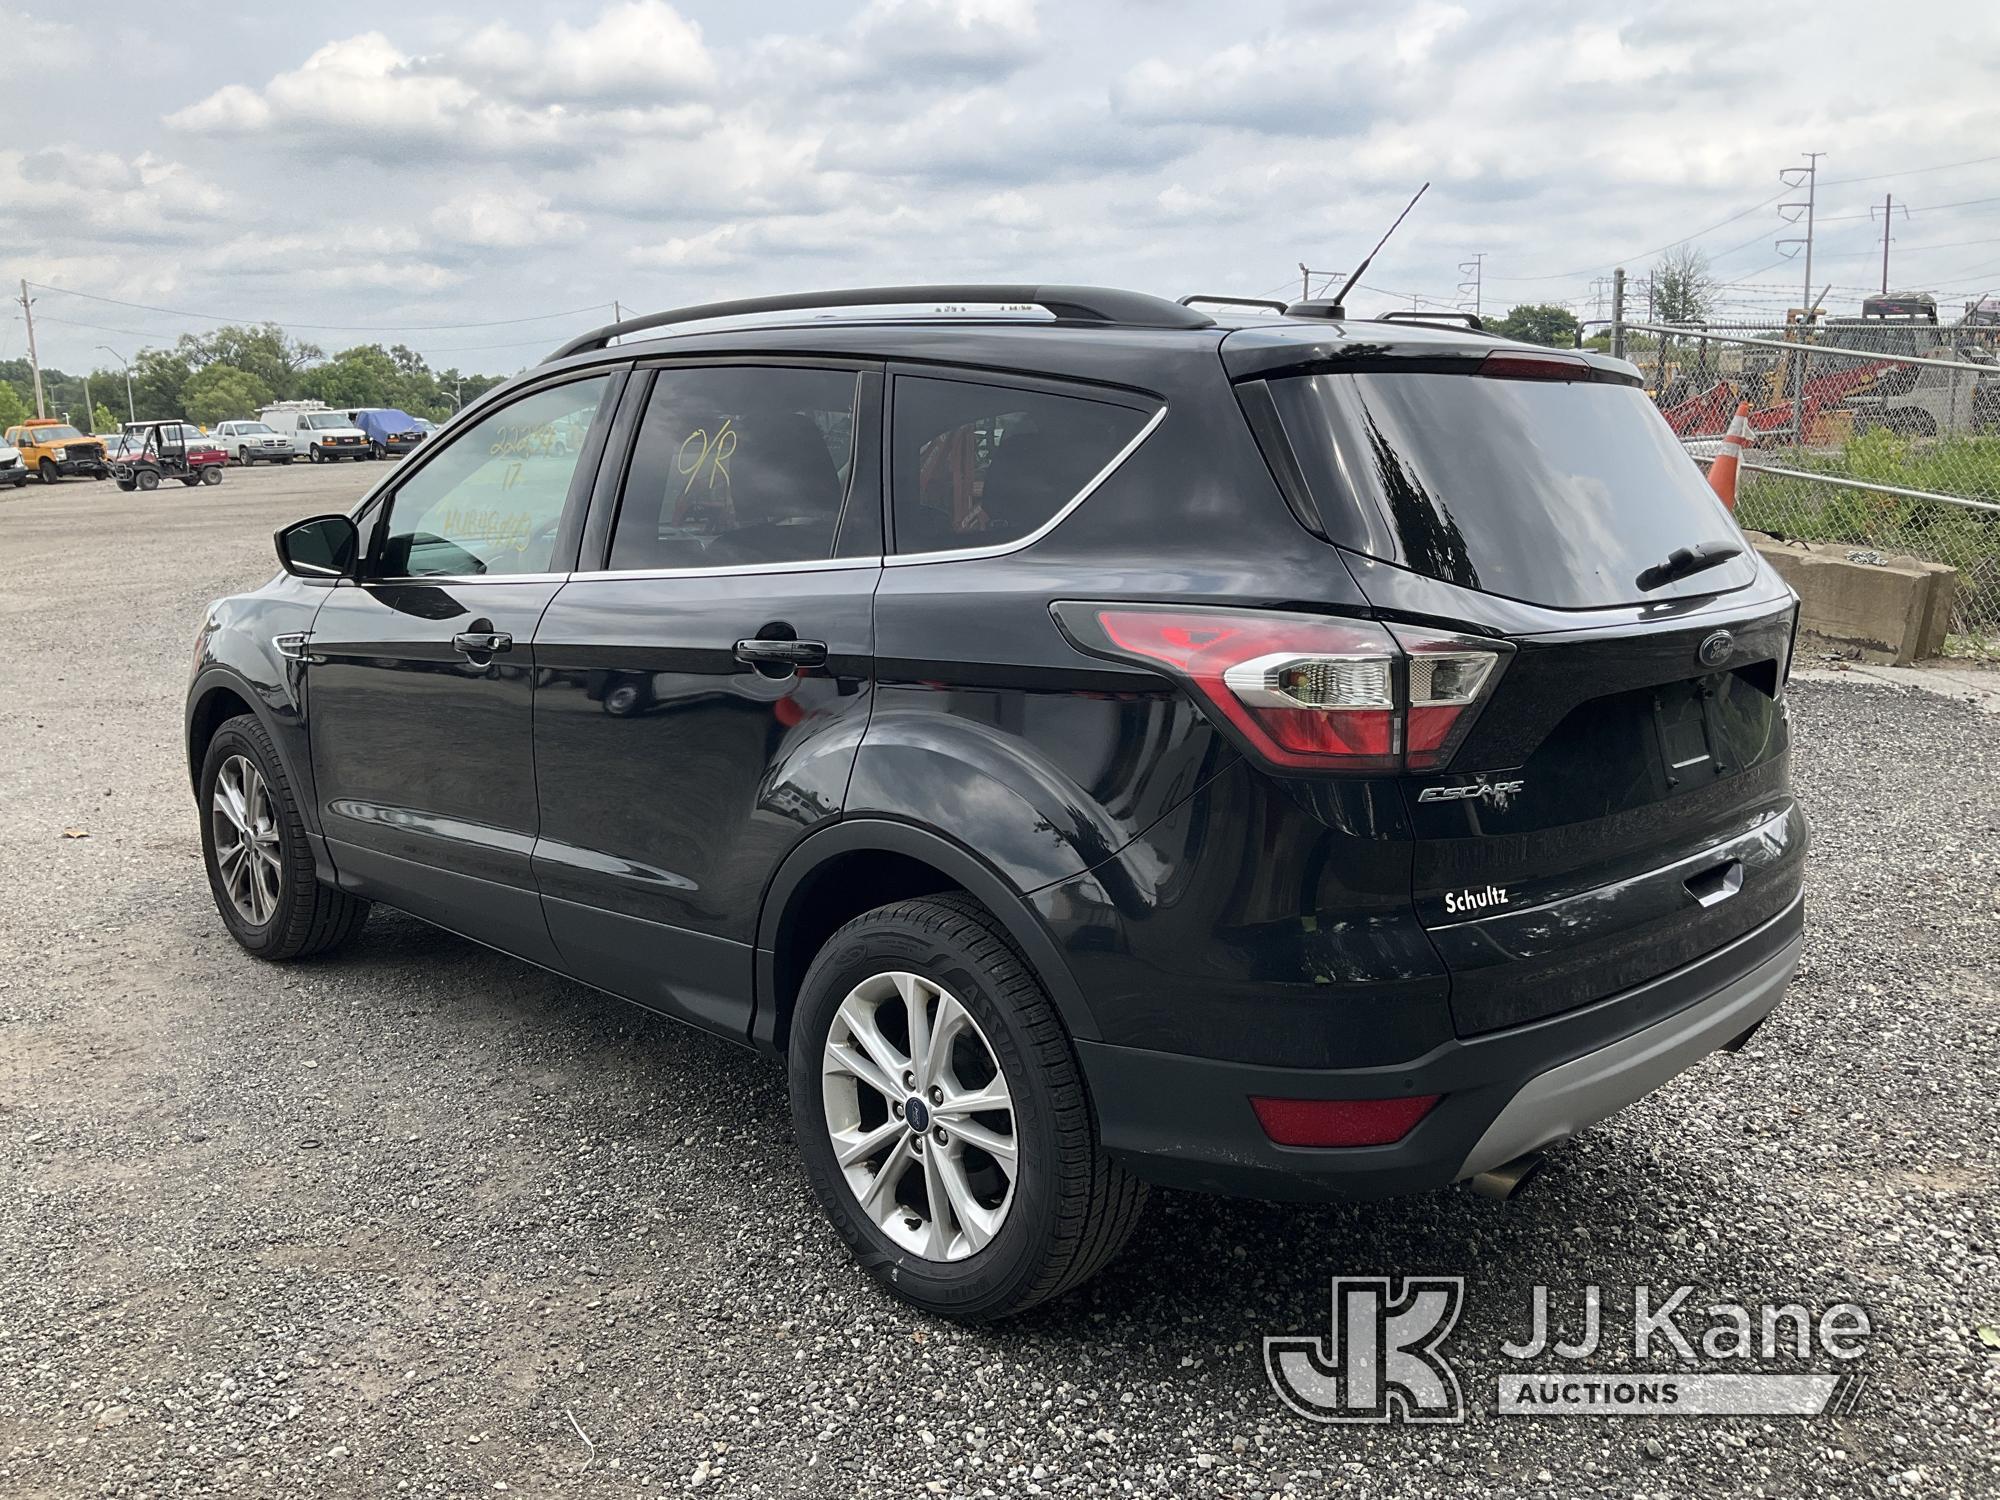 (Plymouth Meeting, PA) 2017 Ford Escape 4x4 4-Door Sport Utility Vehicle Runs & Moves, Check Engine